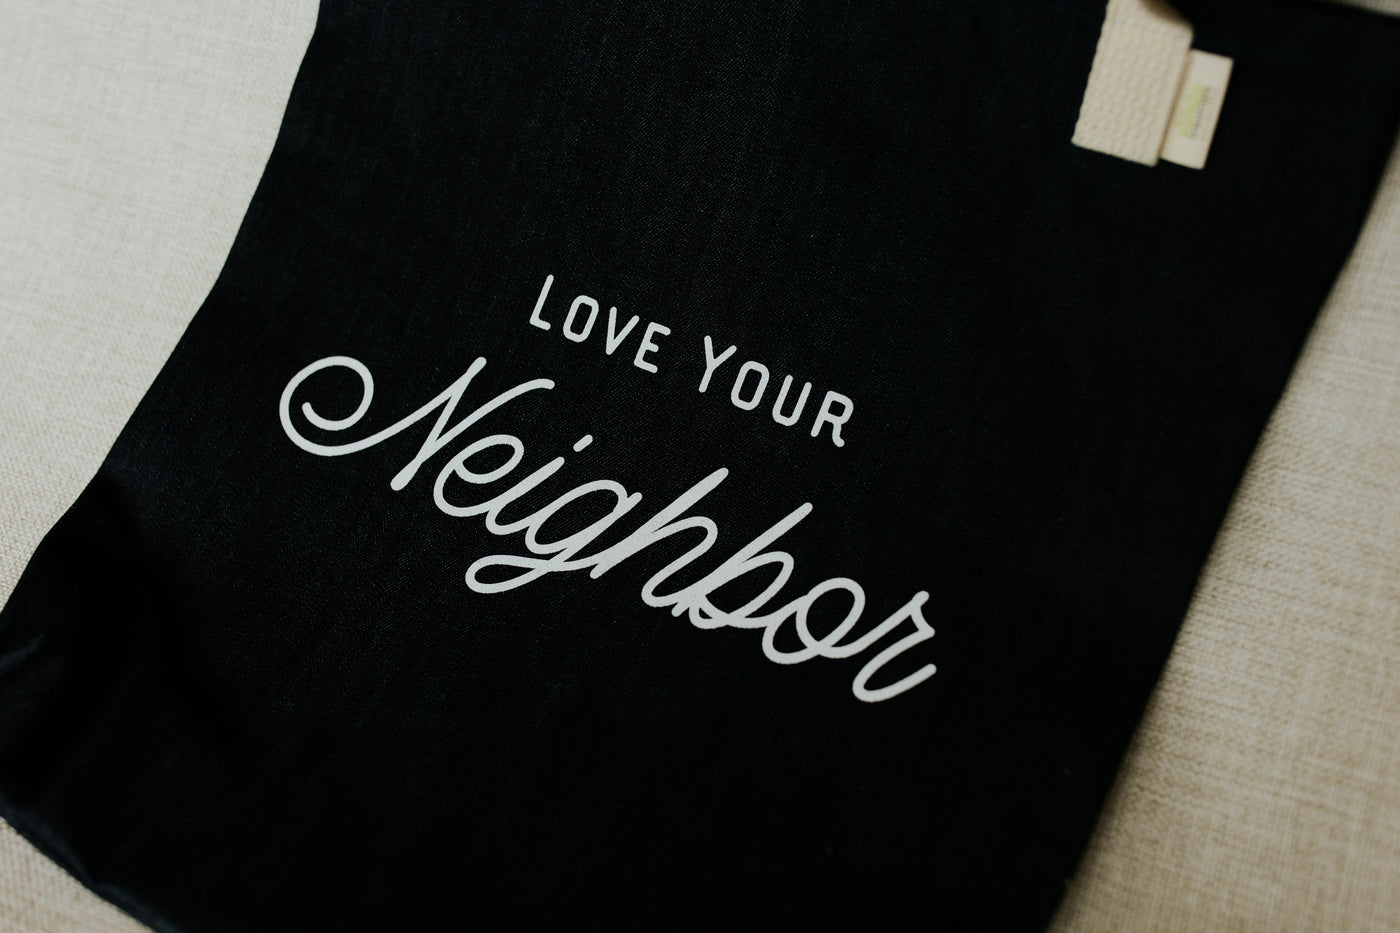 Love Your Neighbor Tote